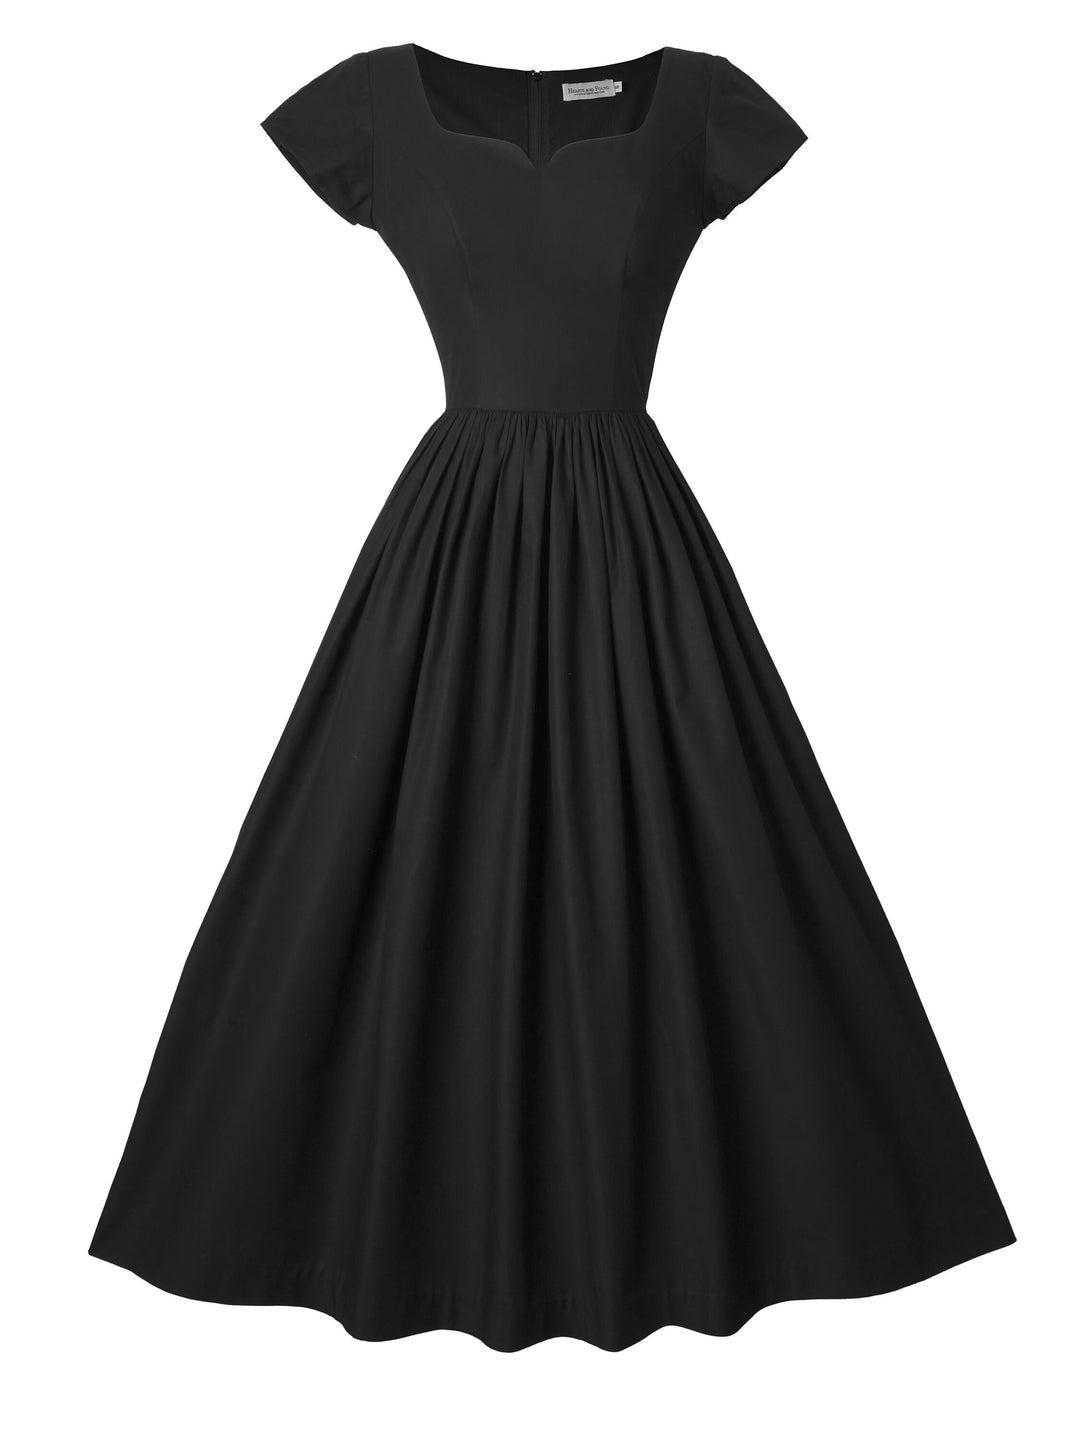 RTS - Size S - Evelyn Dress in Raven Black Cotton